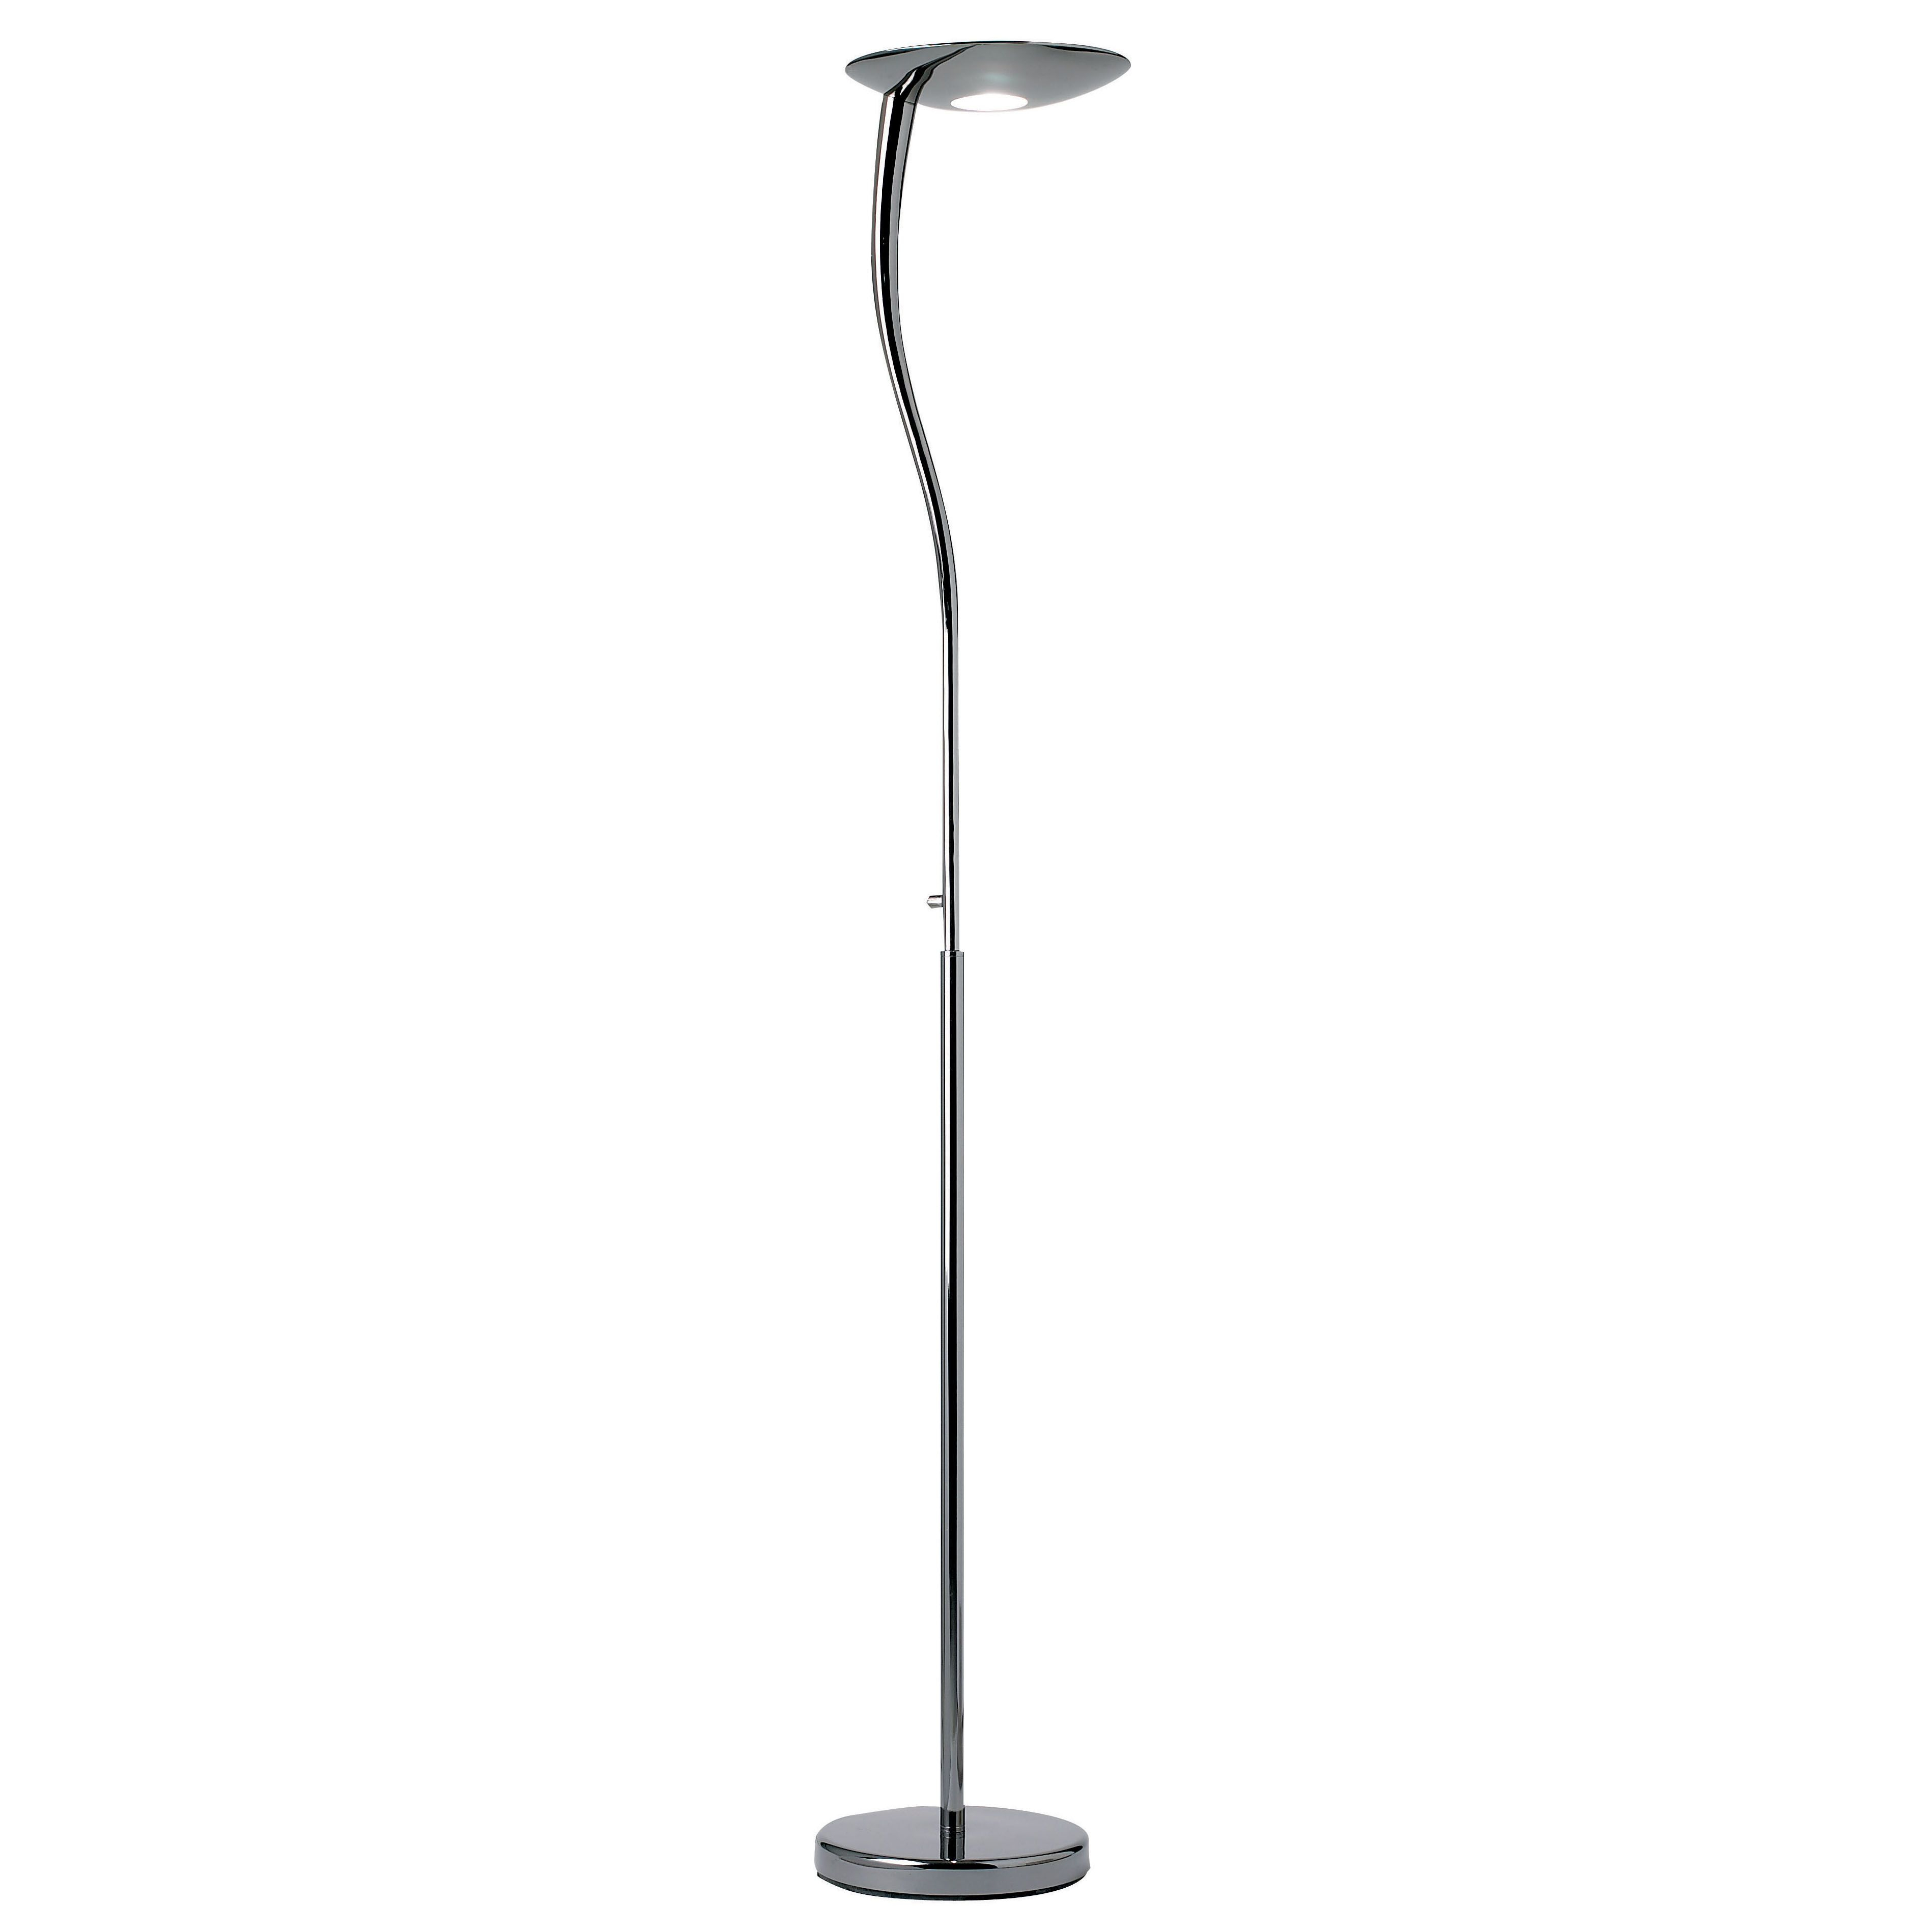 Black Chrome Halogen Floor Lamp Dimmer 300w Rimini Bc Lamps within proportions 3796 X 3796